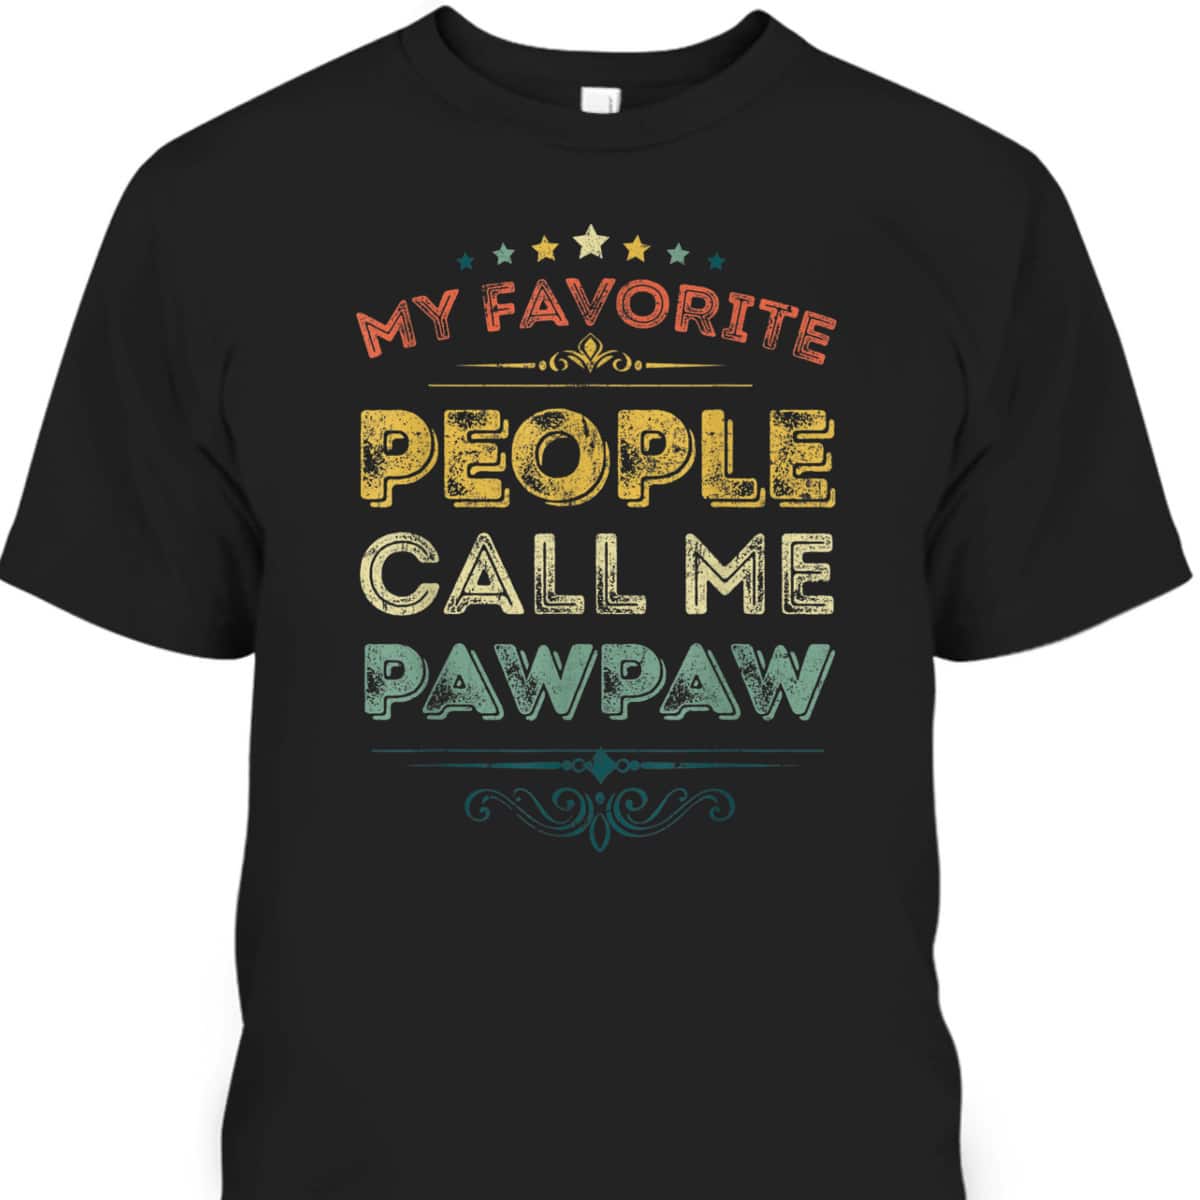 Vintage Father's Day T-Shirt My Favorite People Call Me Pawpaw